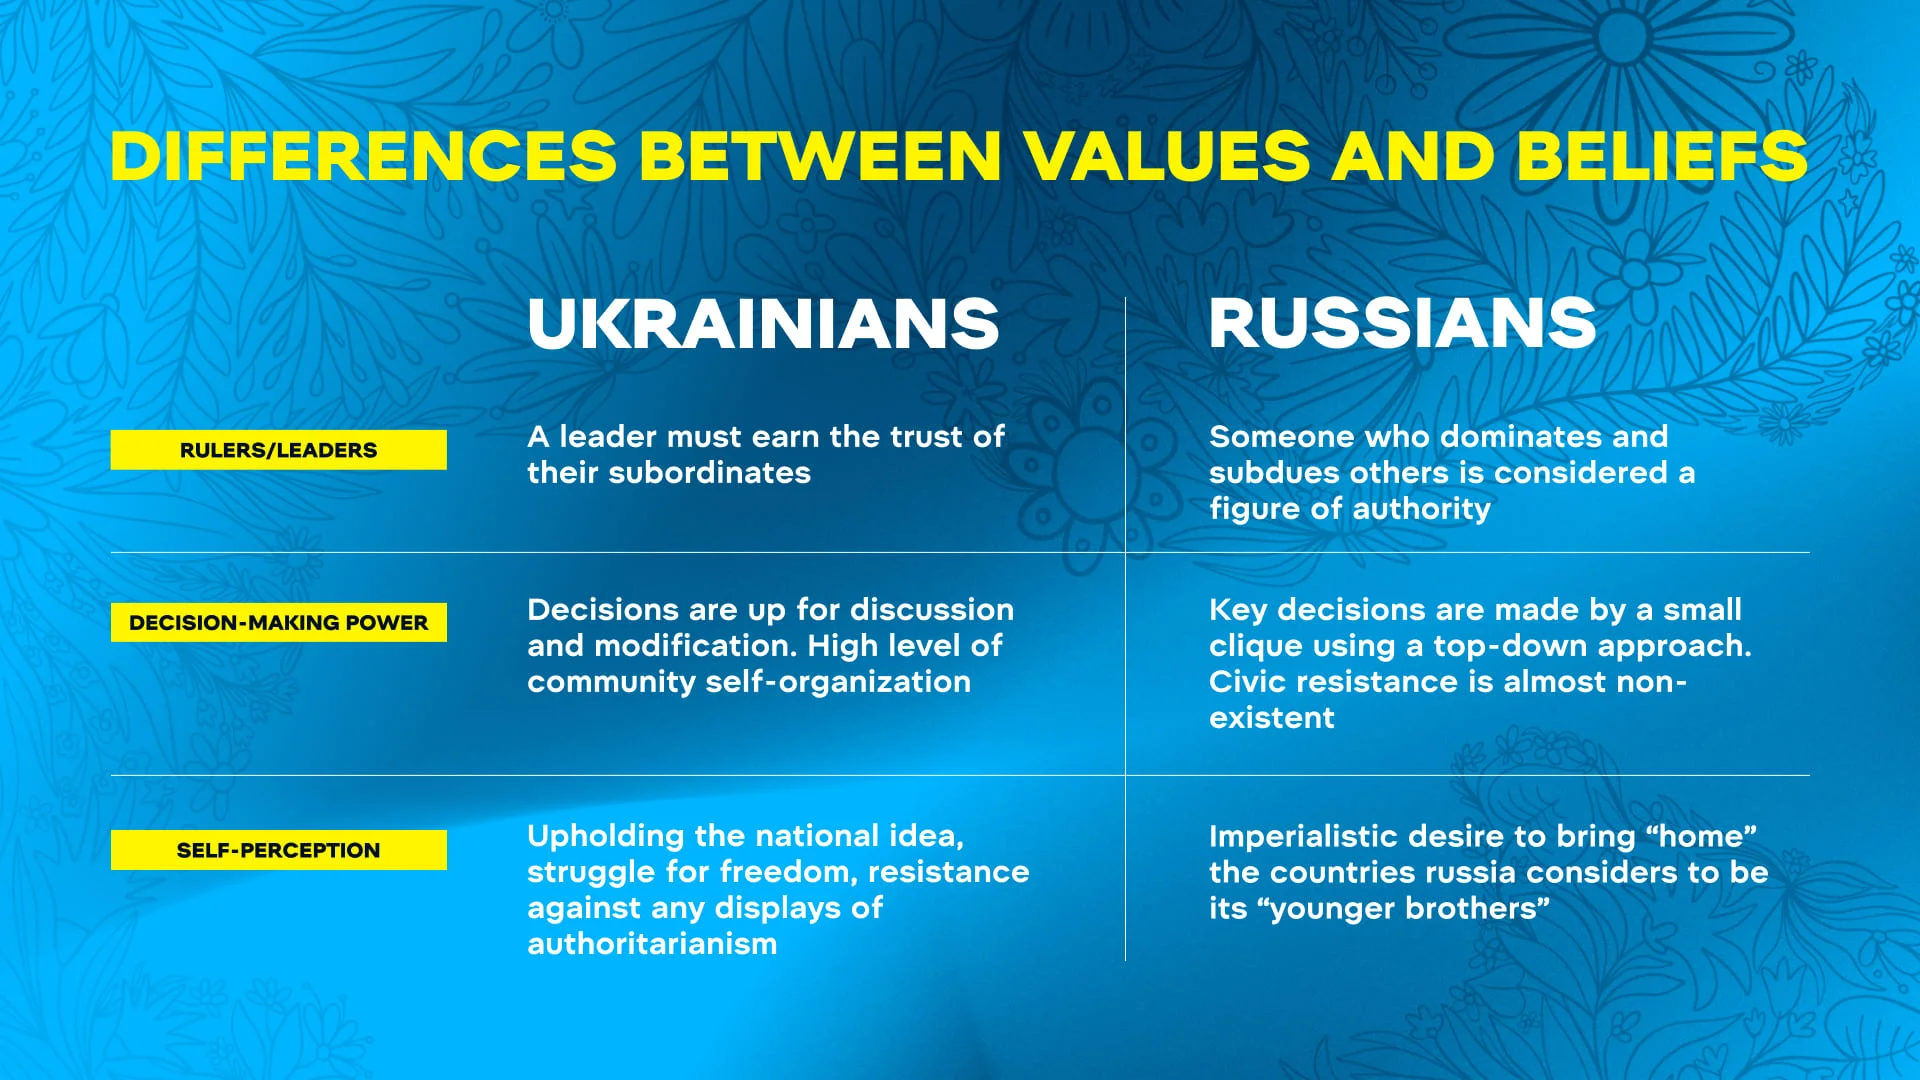 Differences between Ukrainians’ and russians’ values ​​and beliefs. Credit: Weplay Holding